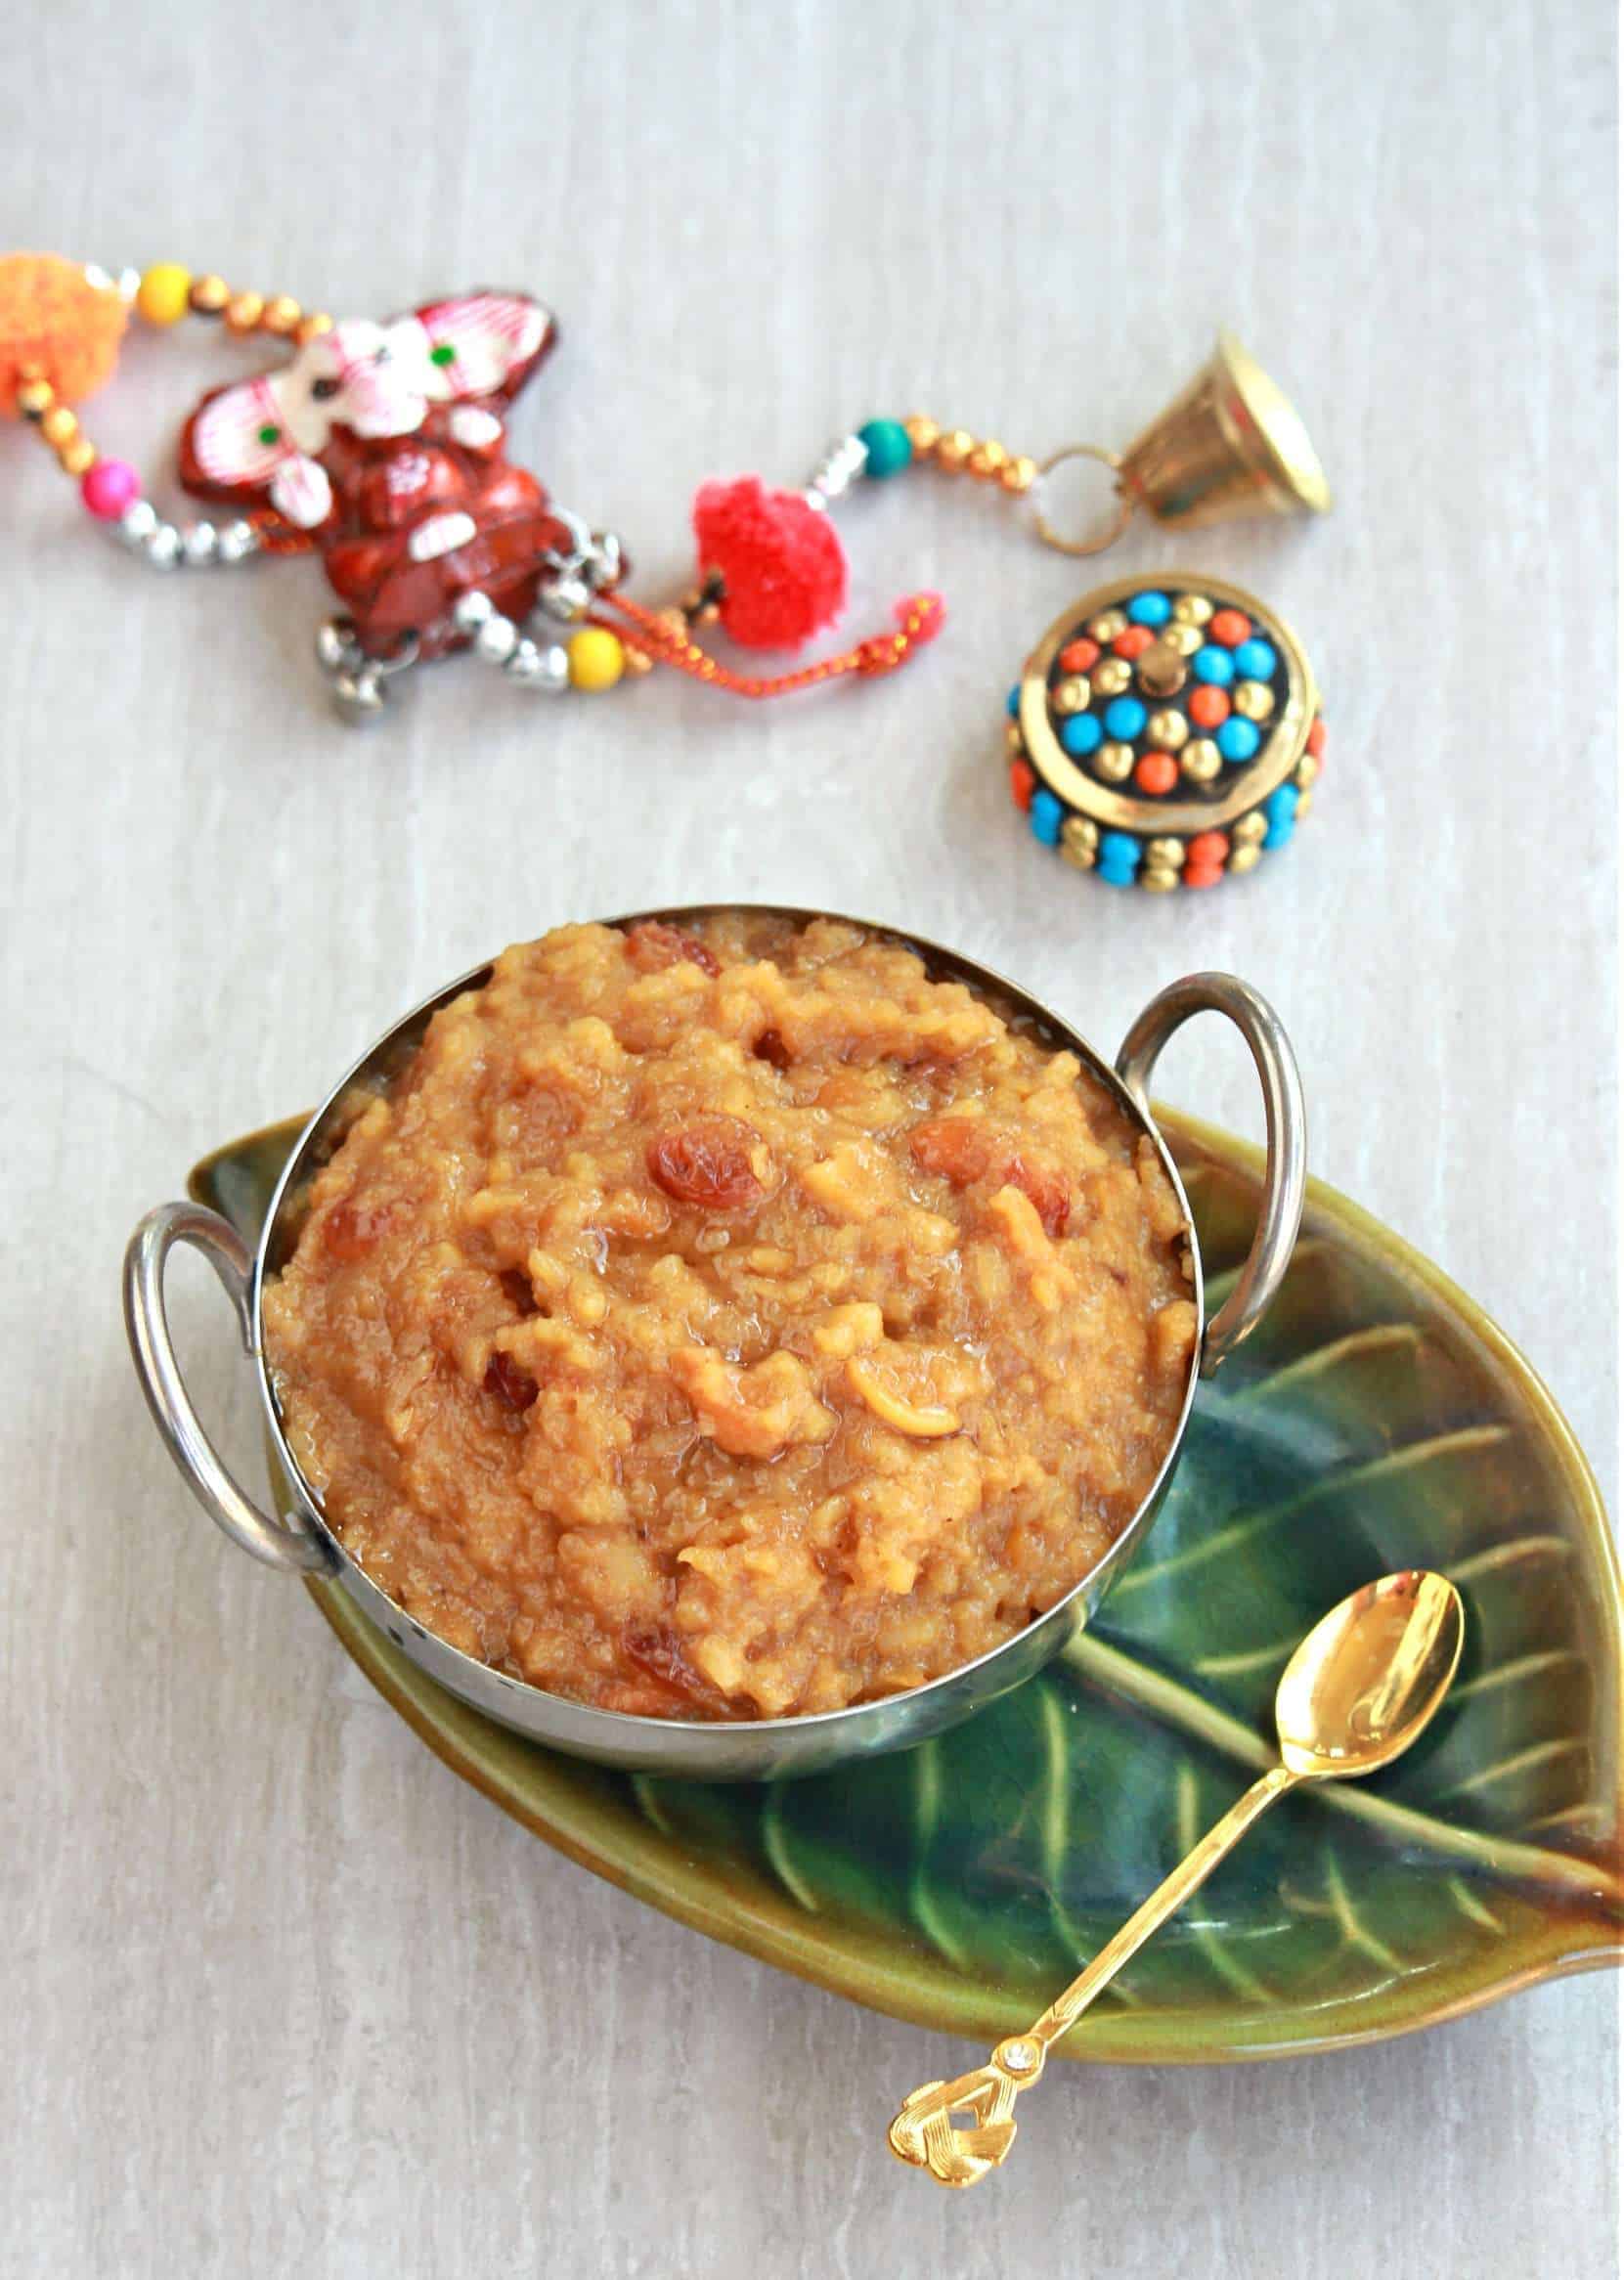 sweet pongal in a bowl with decorative accessories in the background